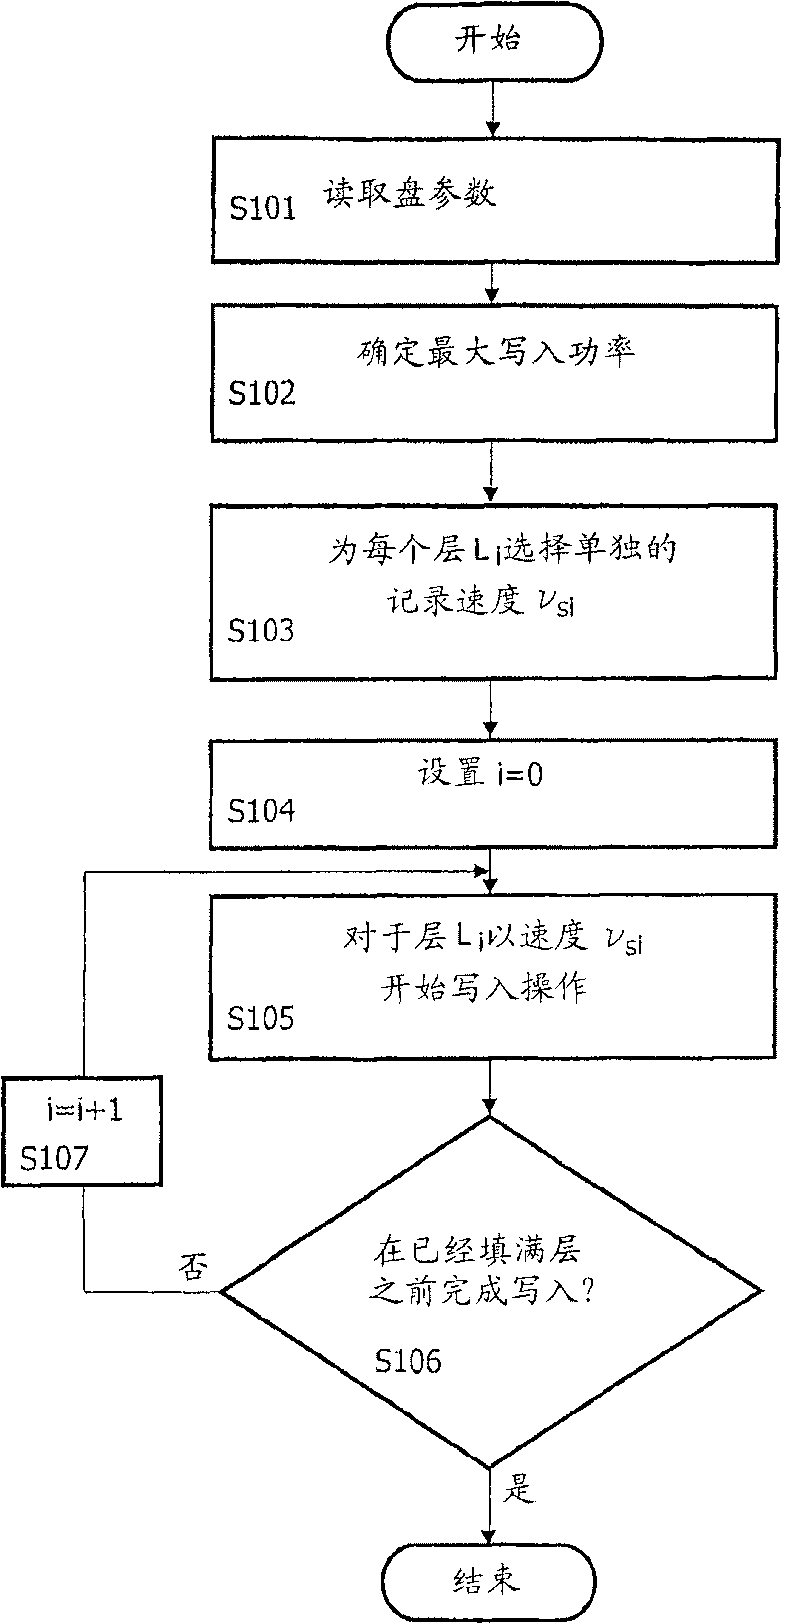 Multi-speed recording apparatus and method for multi-layer disc